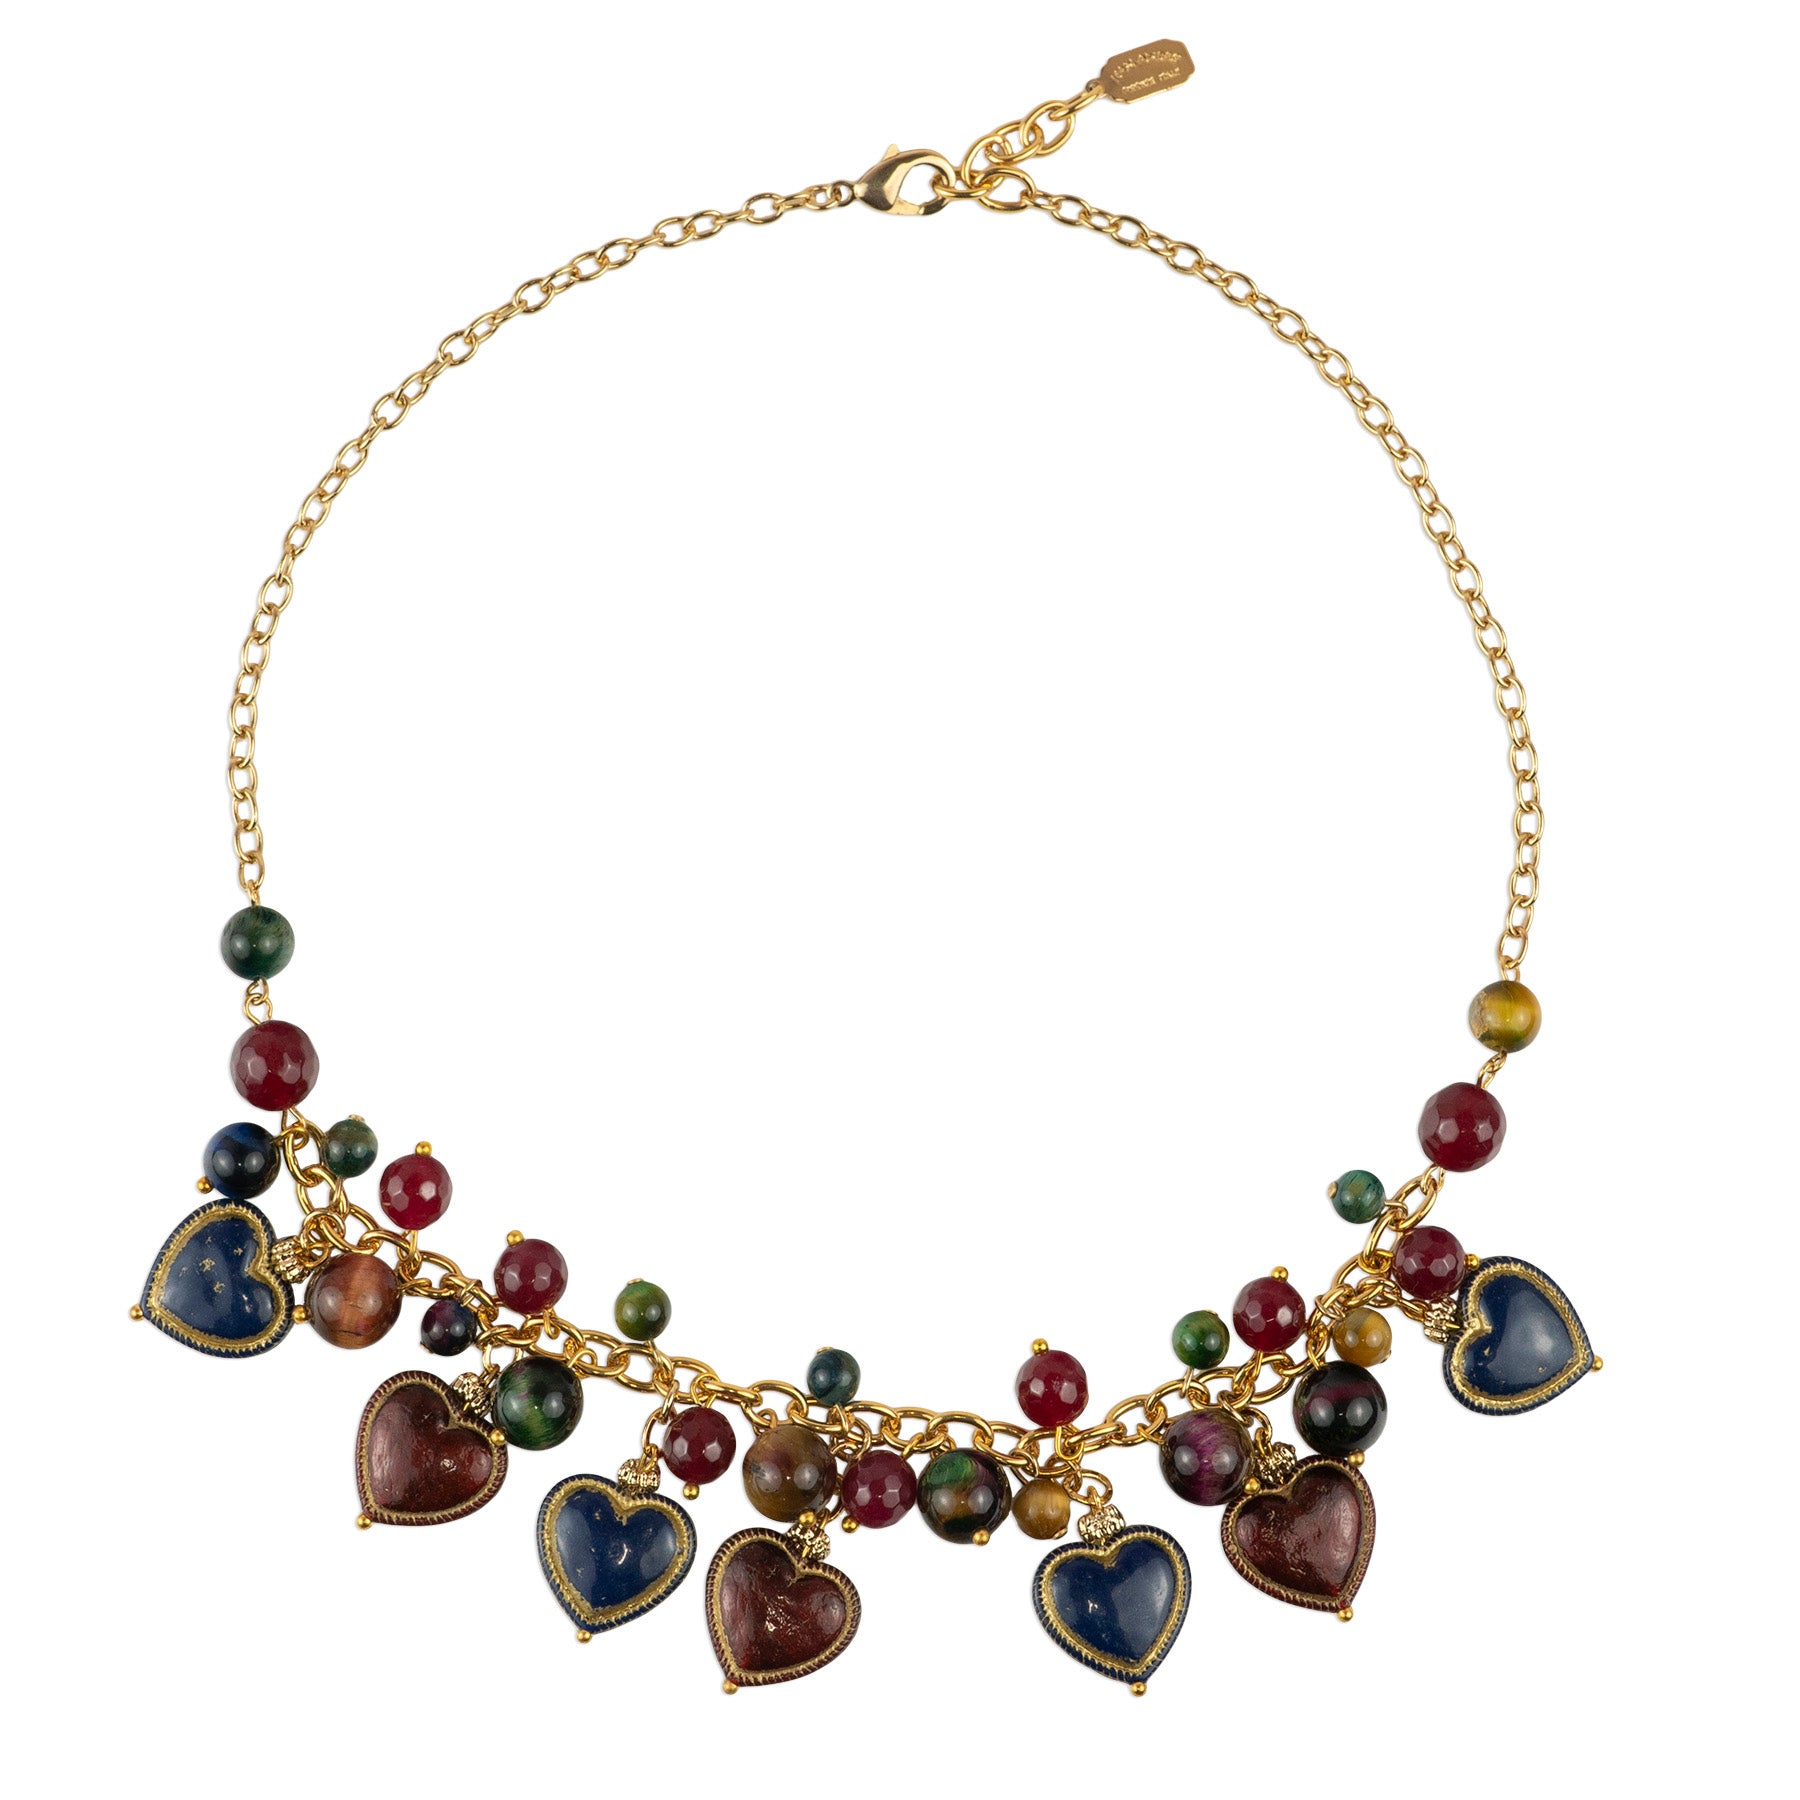 Charm choker necklace with semi-precious stones and hearts